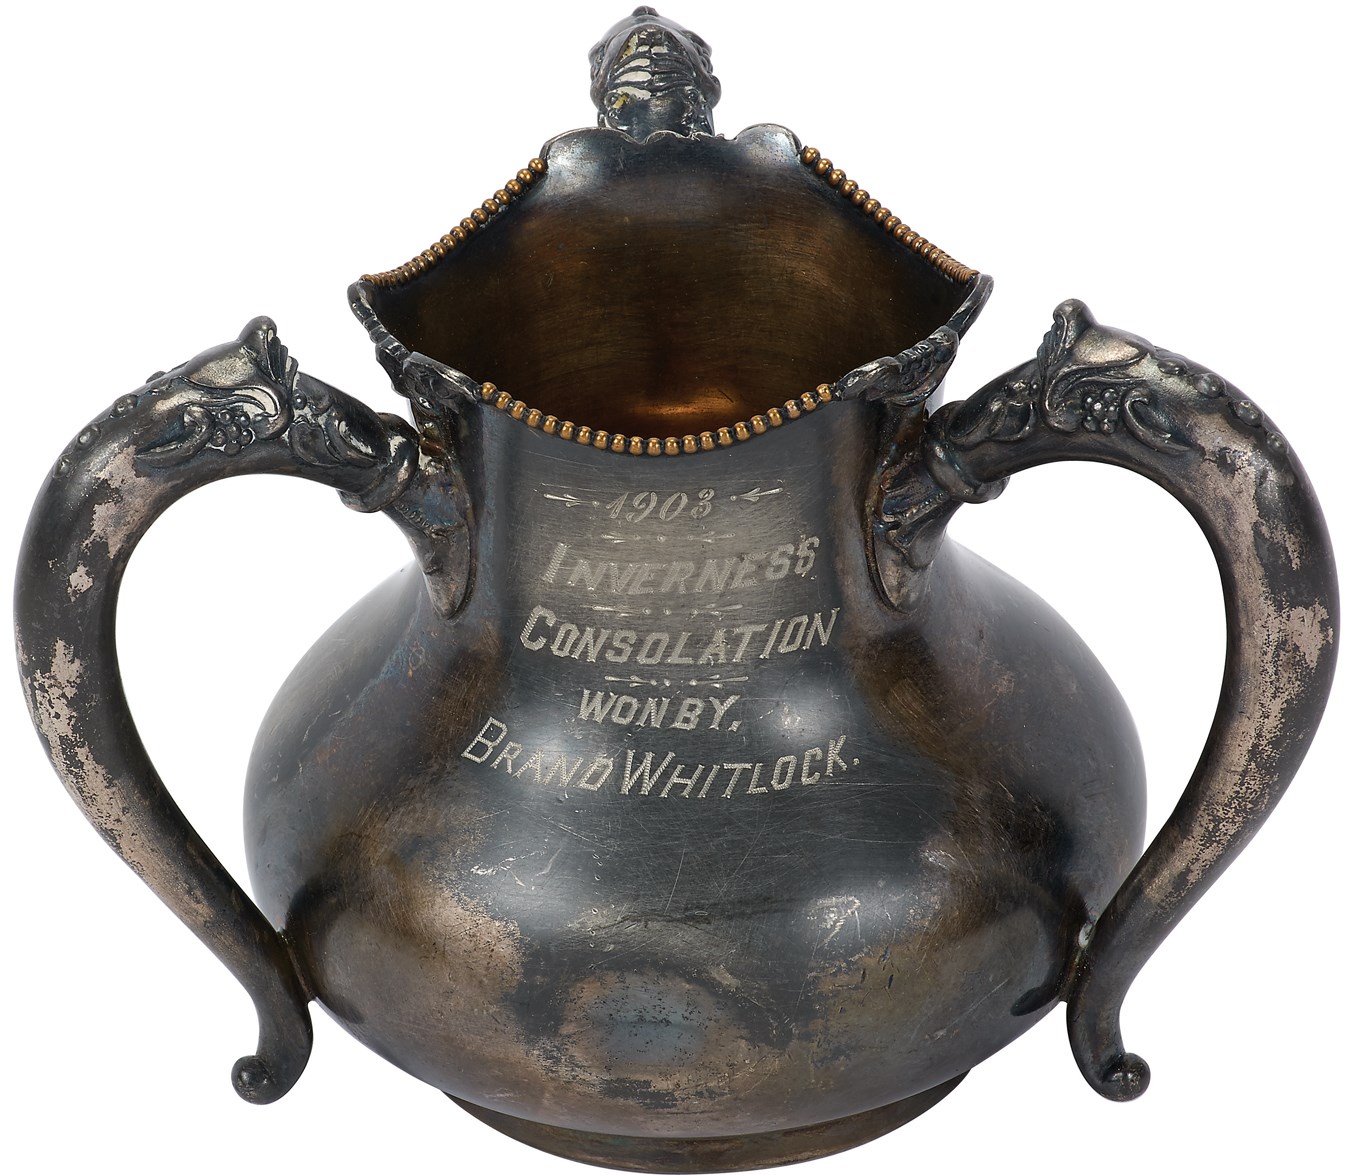 - First Year 1903 Inverness Golf Trophy Presented to Prominent Man